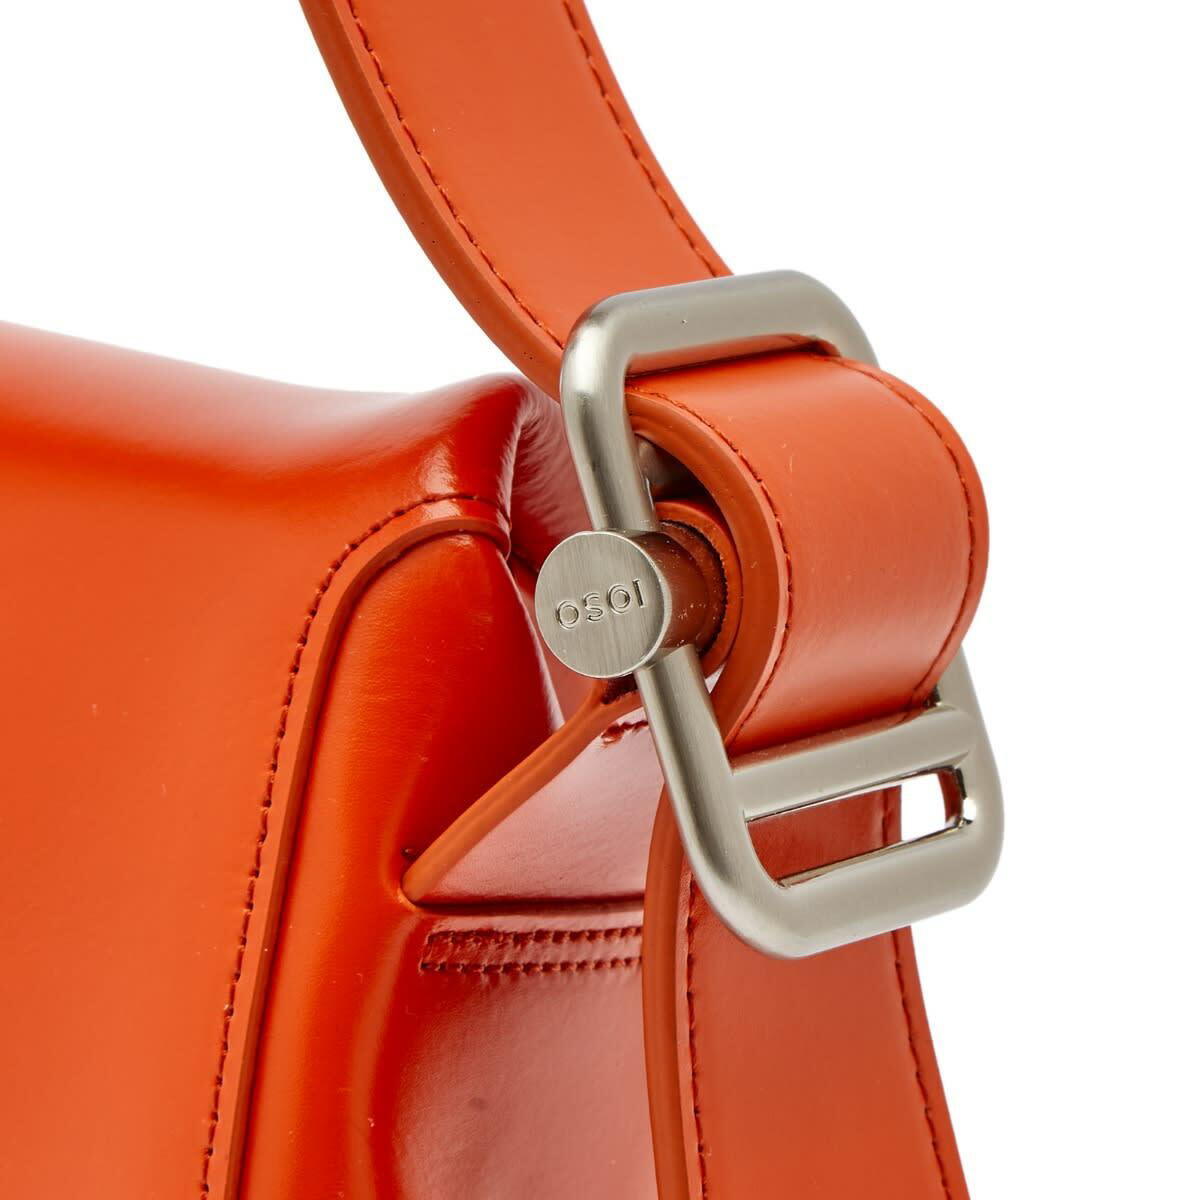 Osoi Folder brot bag smooth carrot red leather